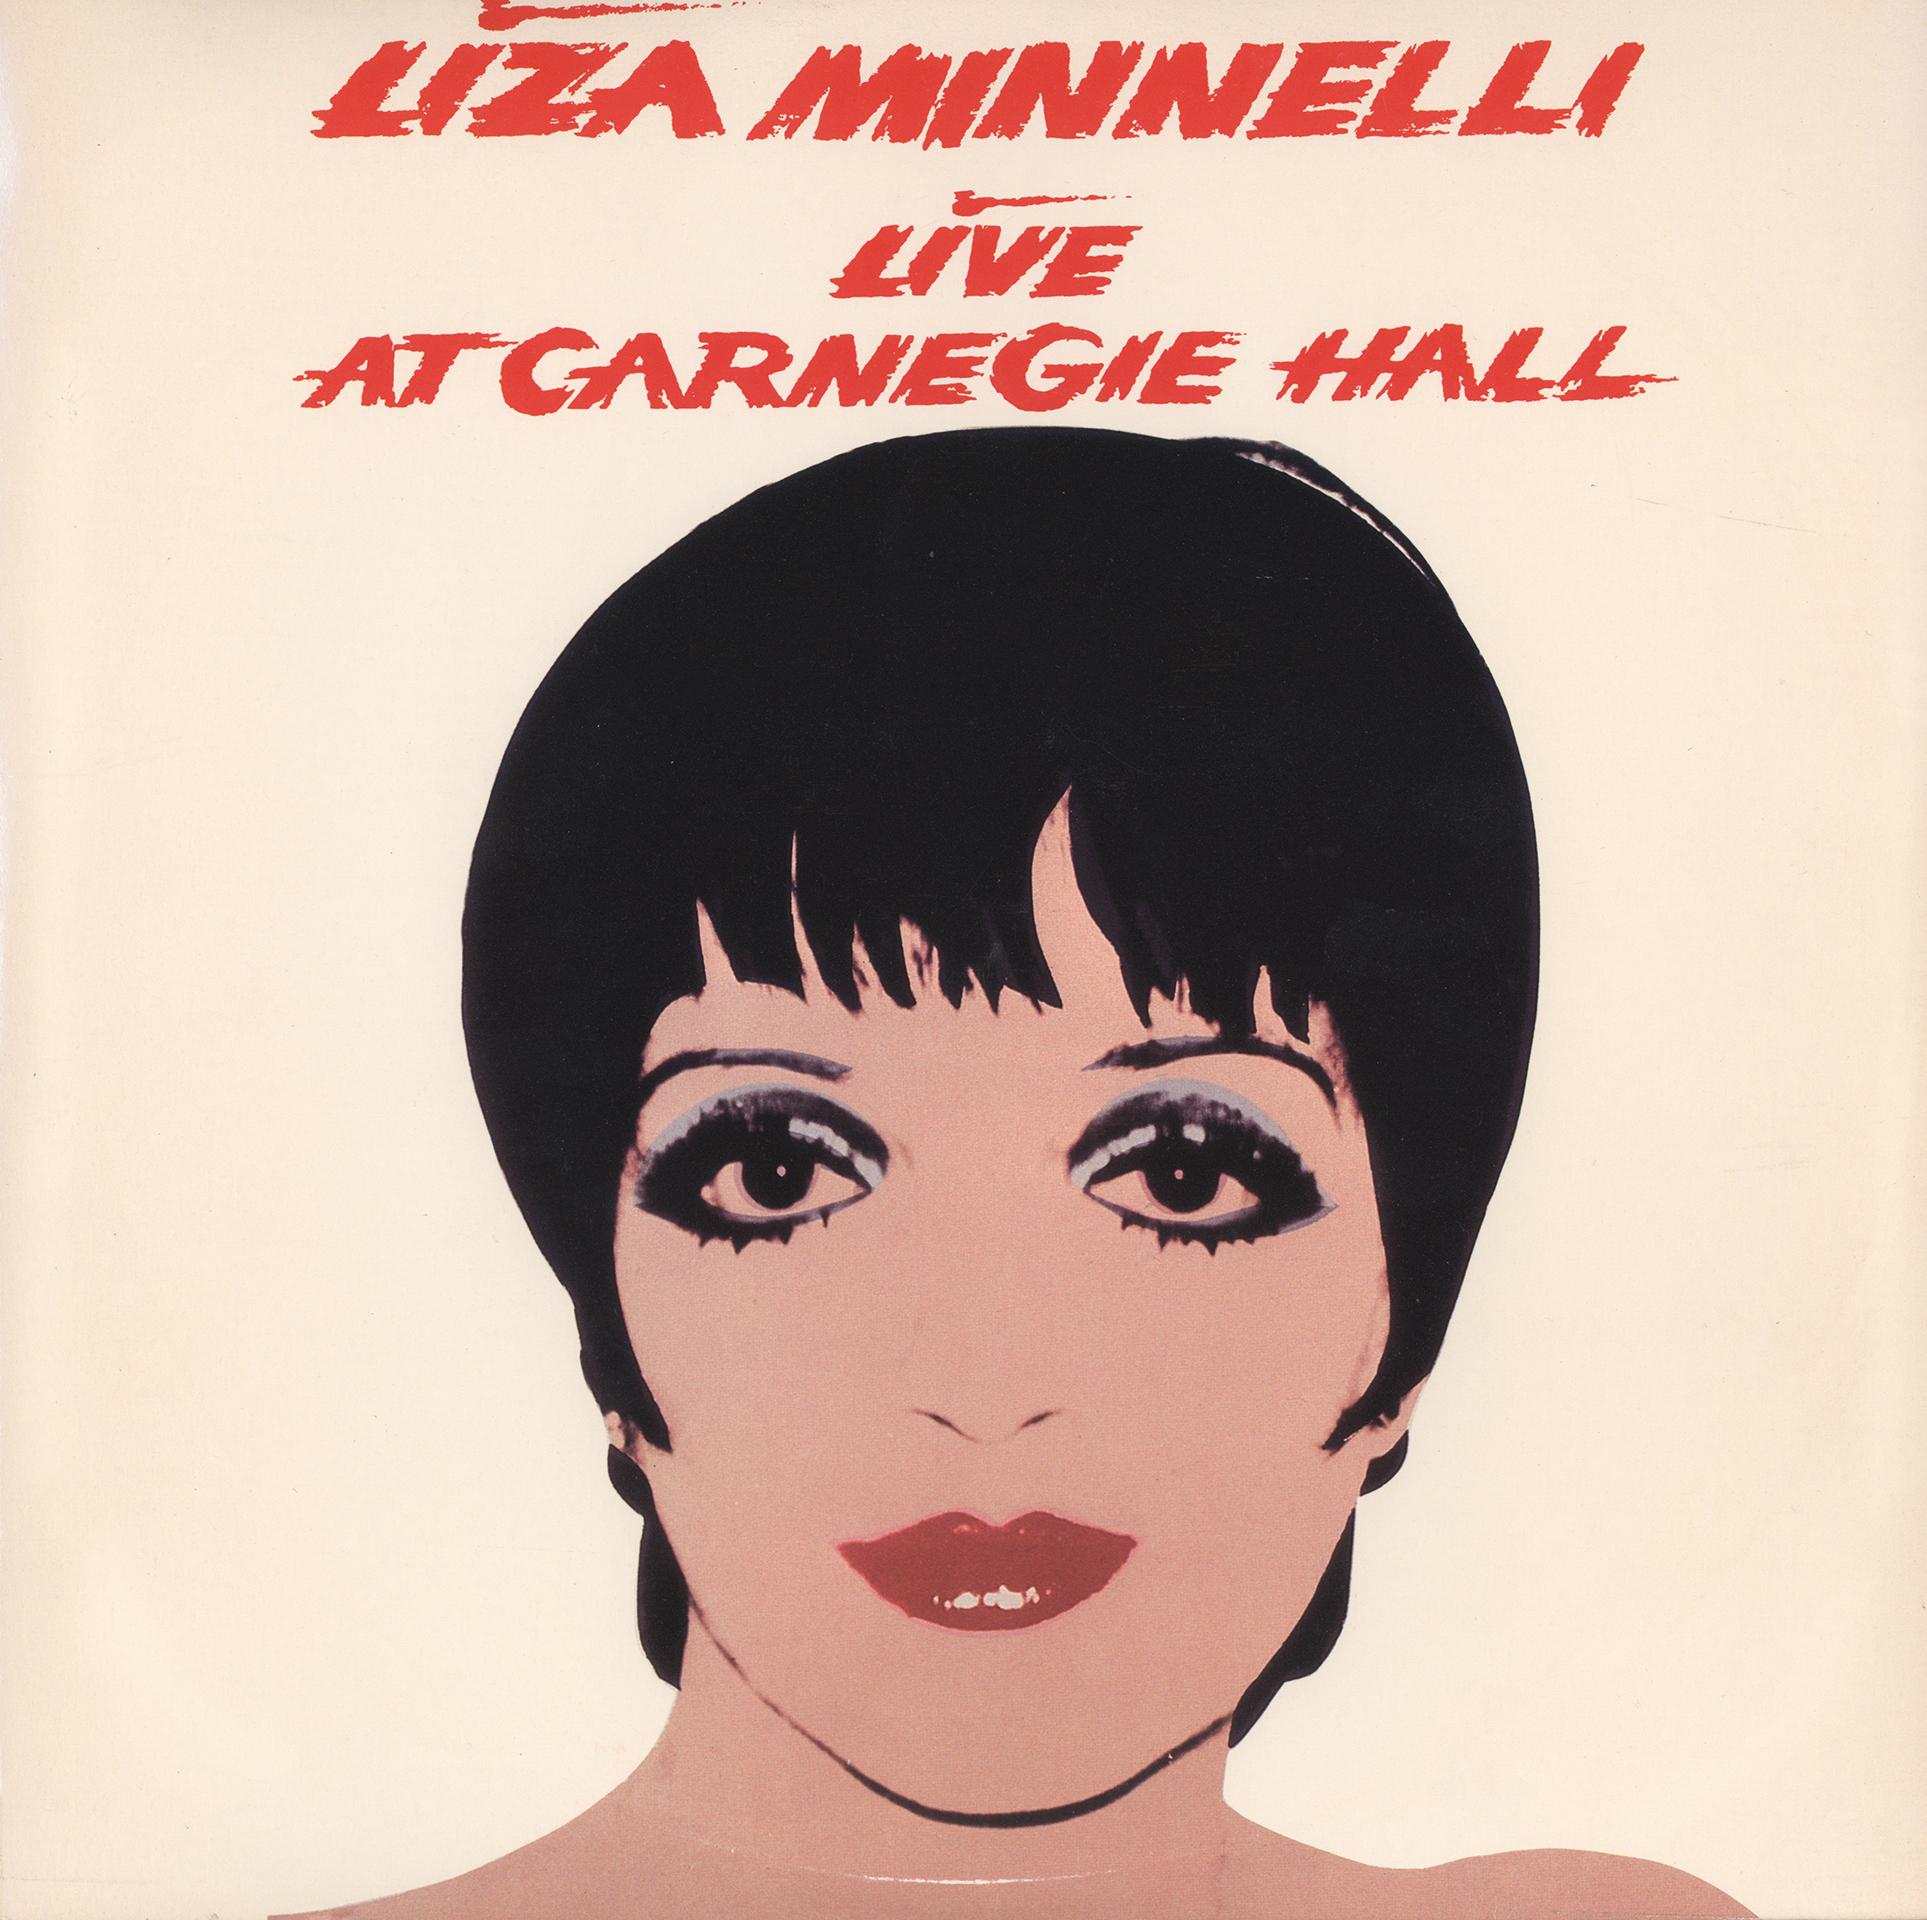 Rare Sought After Andy Warhol Liza Minnelli Vinyl Record Art:
Offset illustrated by Andy Warhol in 1981 

Off-Set print on vinyl record album cover. 1981. 
12 x 12 inches.
Minor shelf/ring wear; otherwise very good overall vintage condition; also